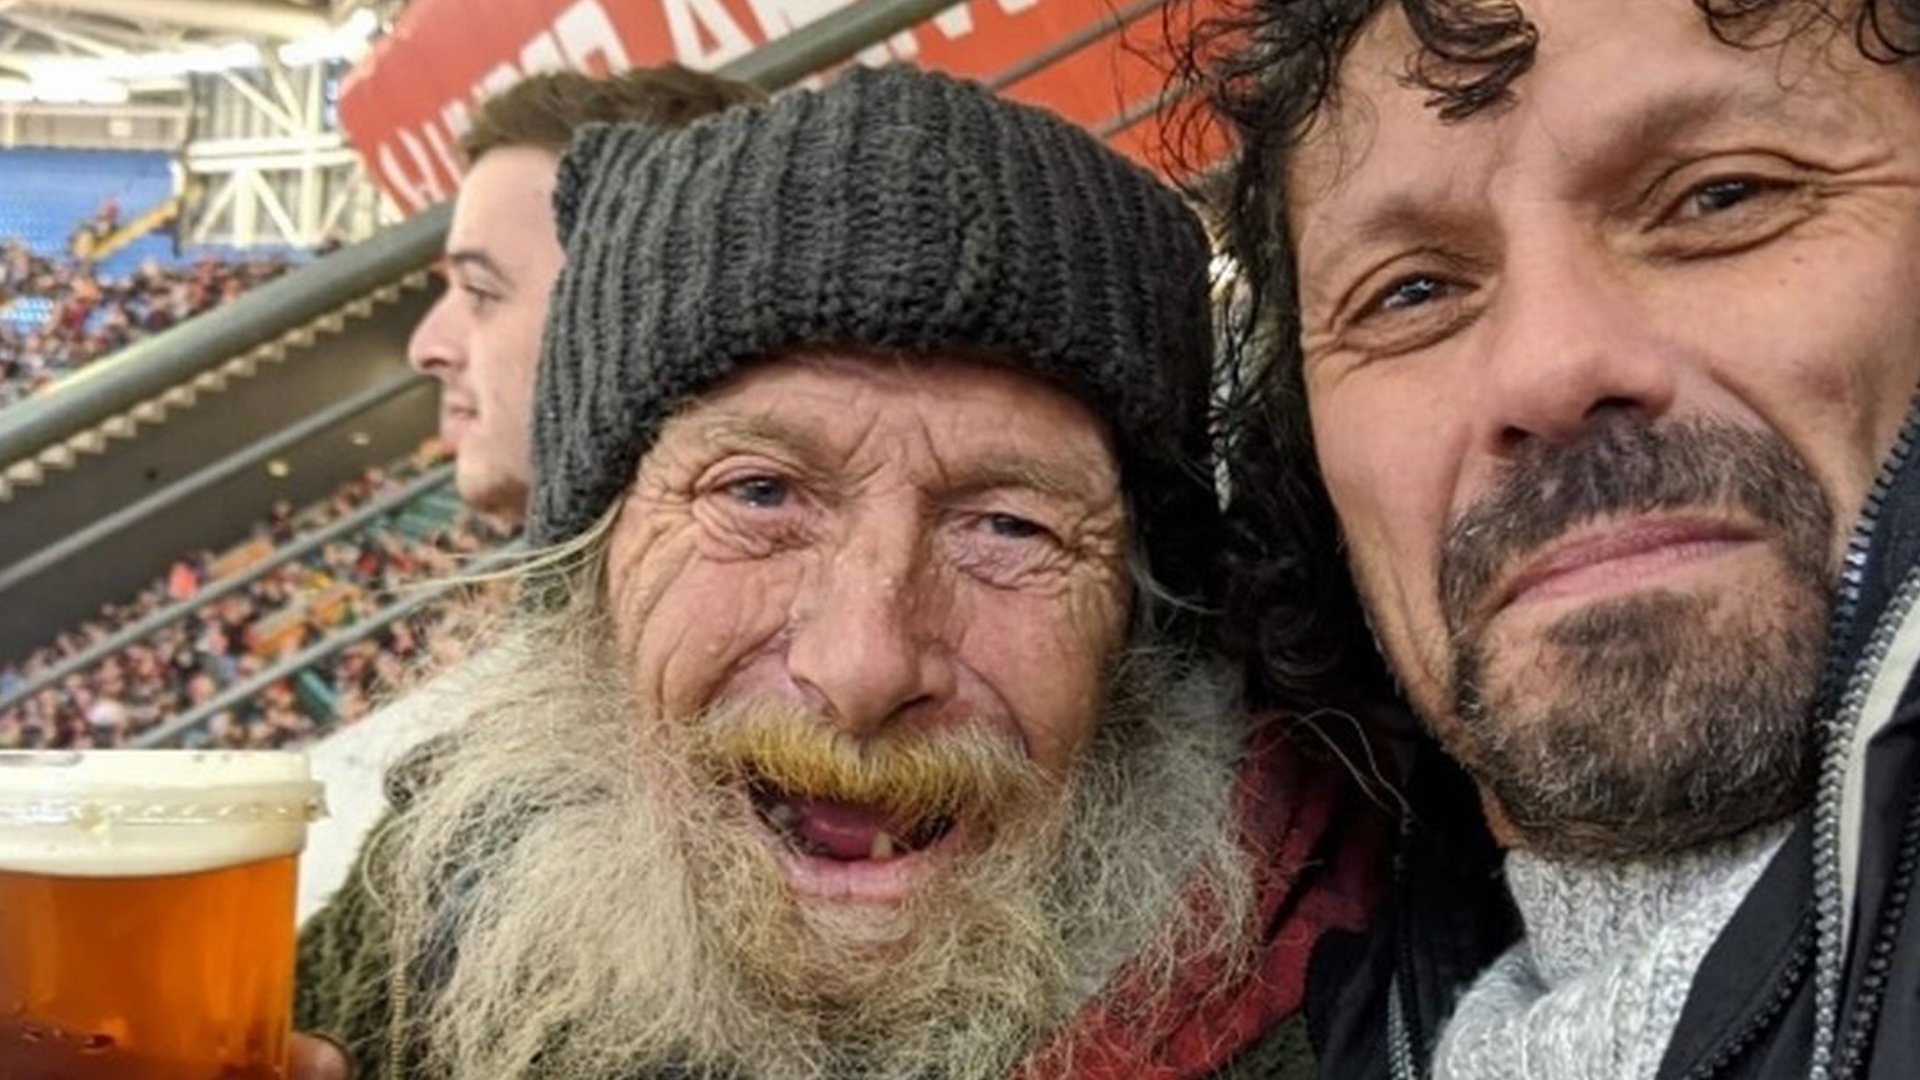 Welsh fan is going viral online after giving homeless man the best gift in rugby